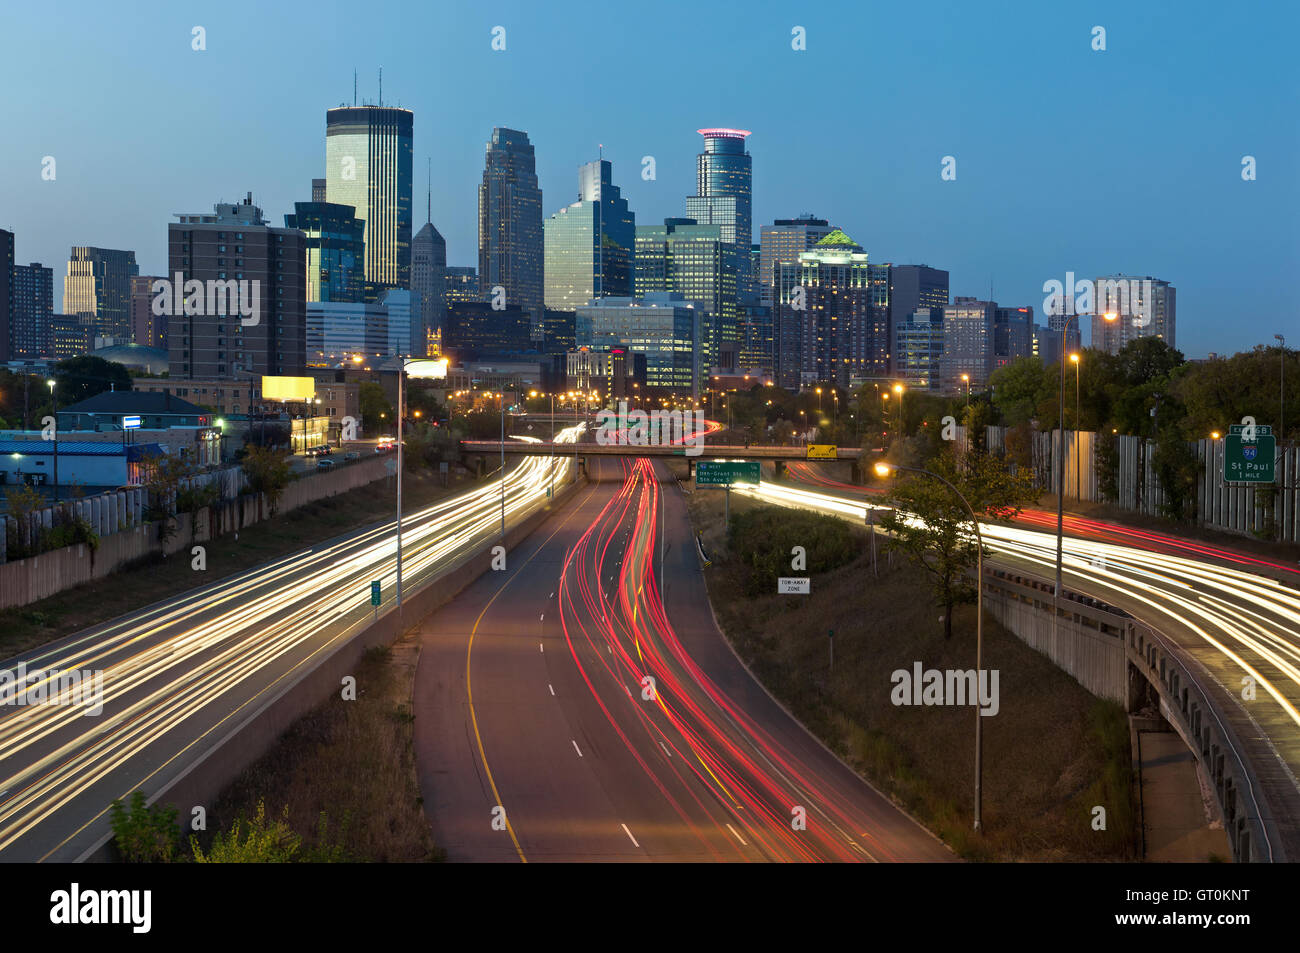 Minneapolis. Image of Minneapolis skyline and highway with traffic lines leading to the city. Stock Photo